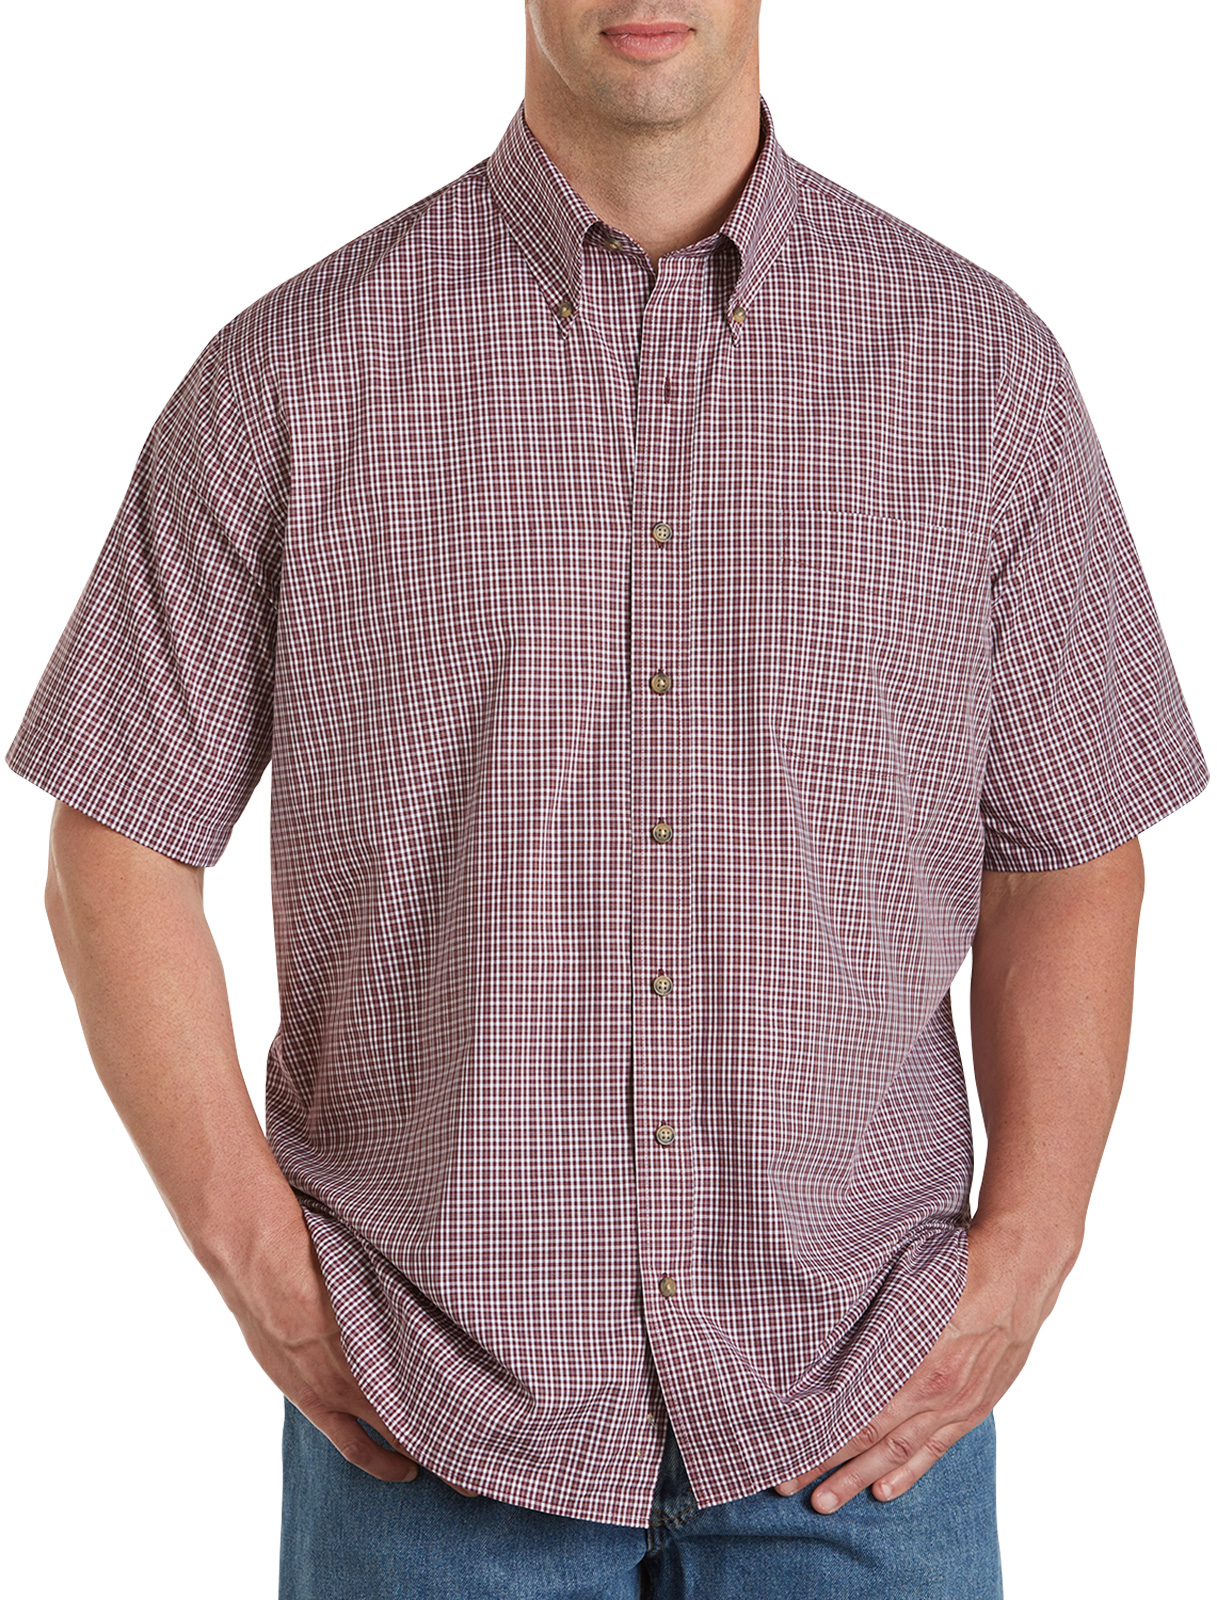 Harbor Bay Men's Big and Tall Easy-Care Gingham Sport Shirt